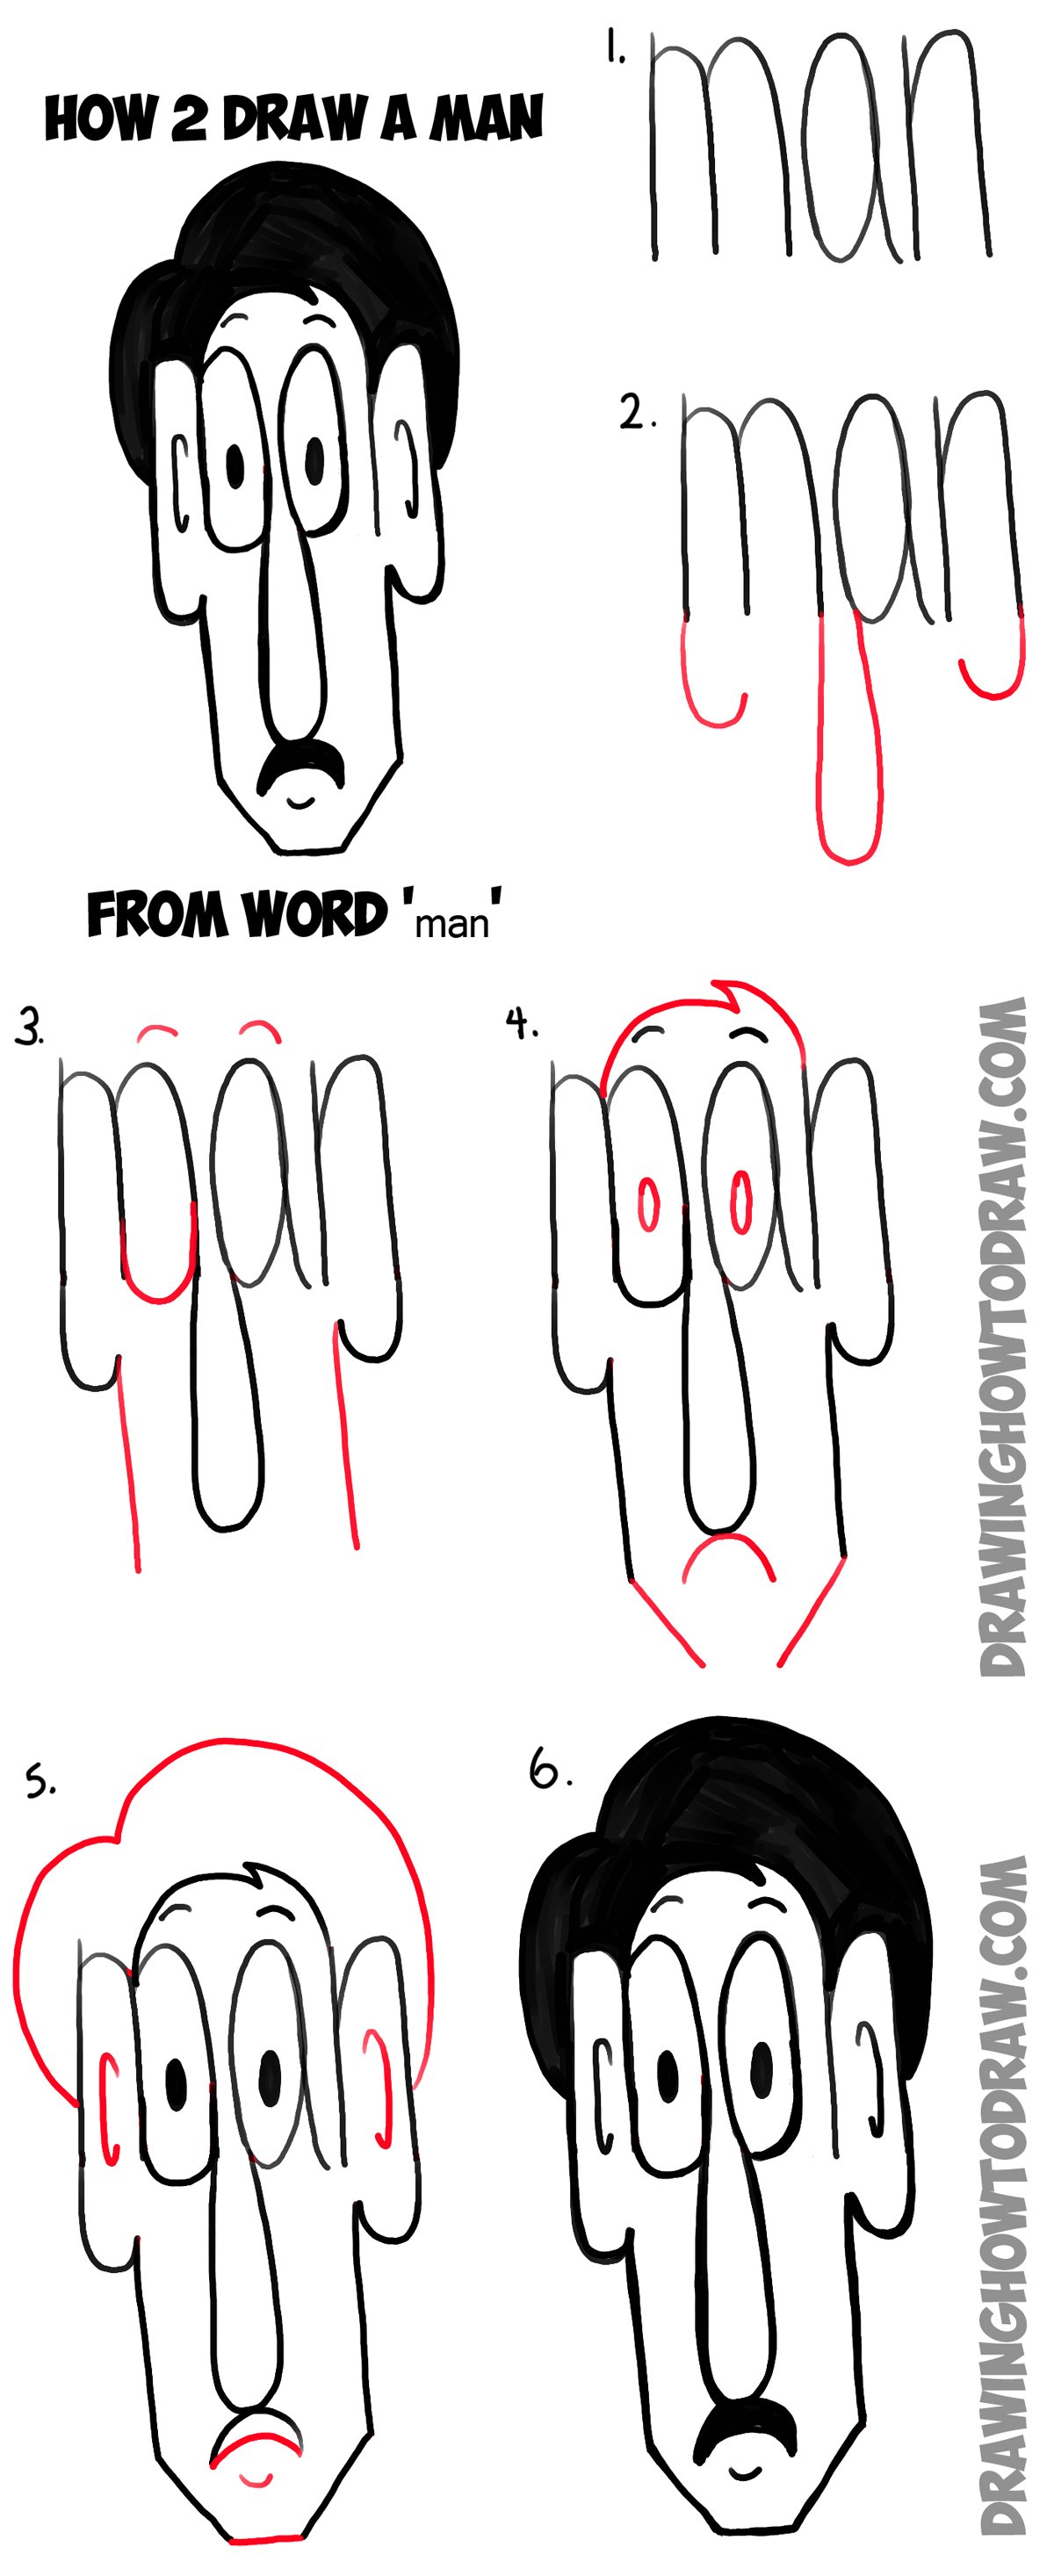 How to Draw Cartoon Man from the Word Man Simple Step by Step Drawing Tutorial for Kids